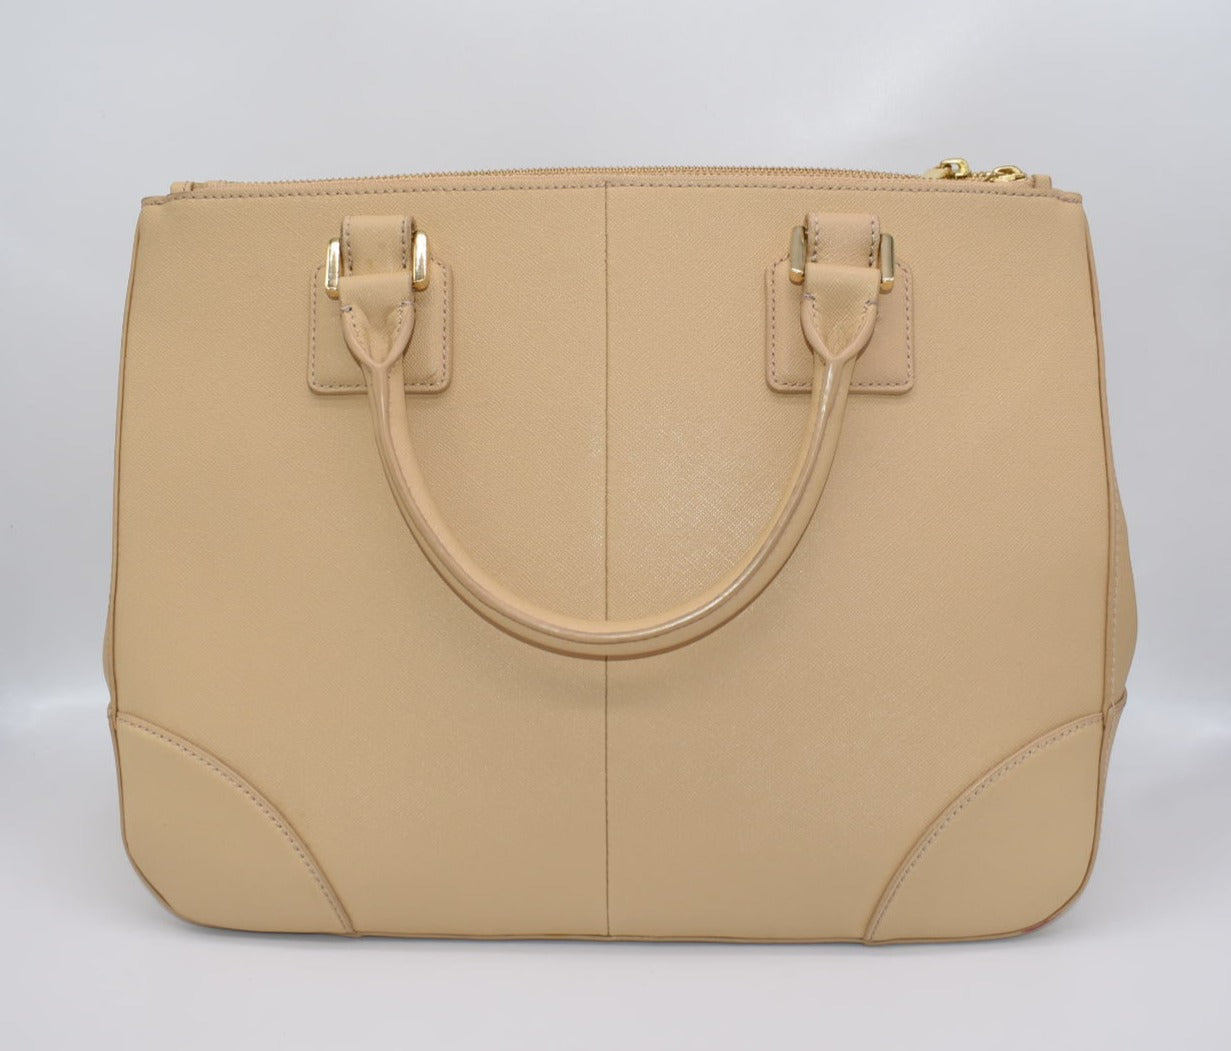 Tory Burch Robinson Double Zip Tote Bag in Sand